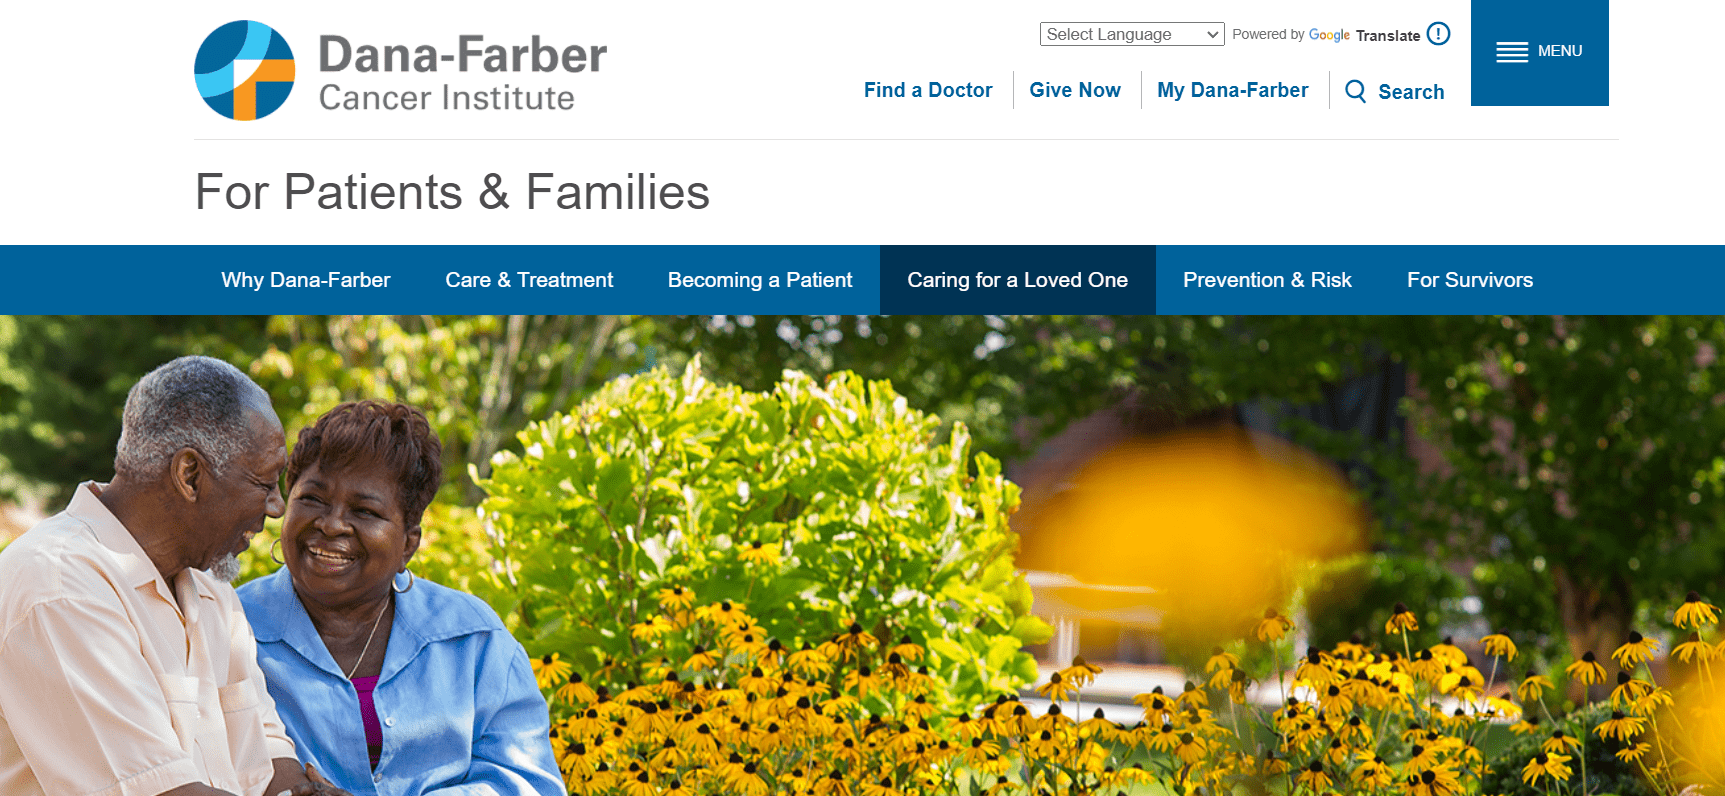 The Dana-Farber Cancer Institute image on their section for caregivers of cancer patients evokes both hope and caring.